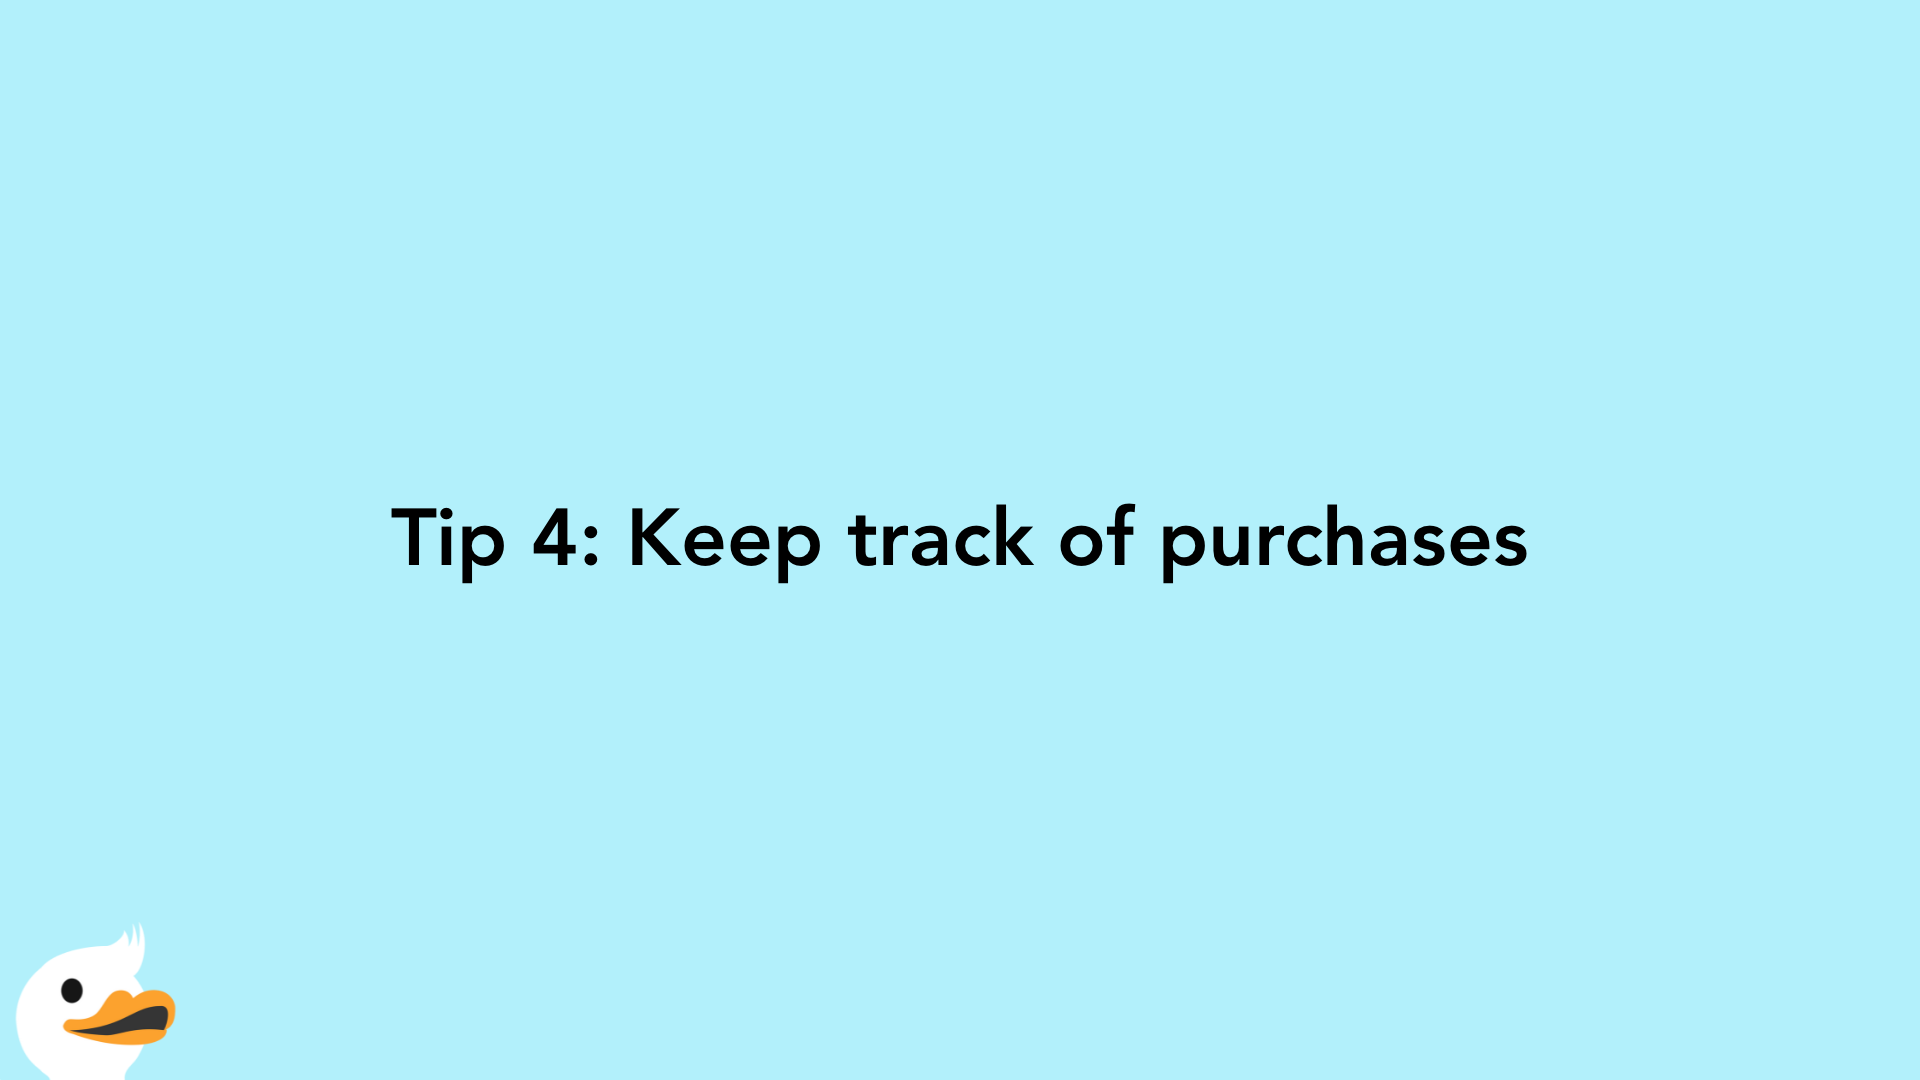 Tip 4: Keep track of purchases